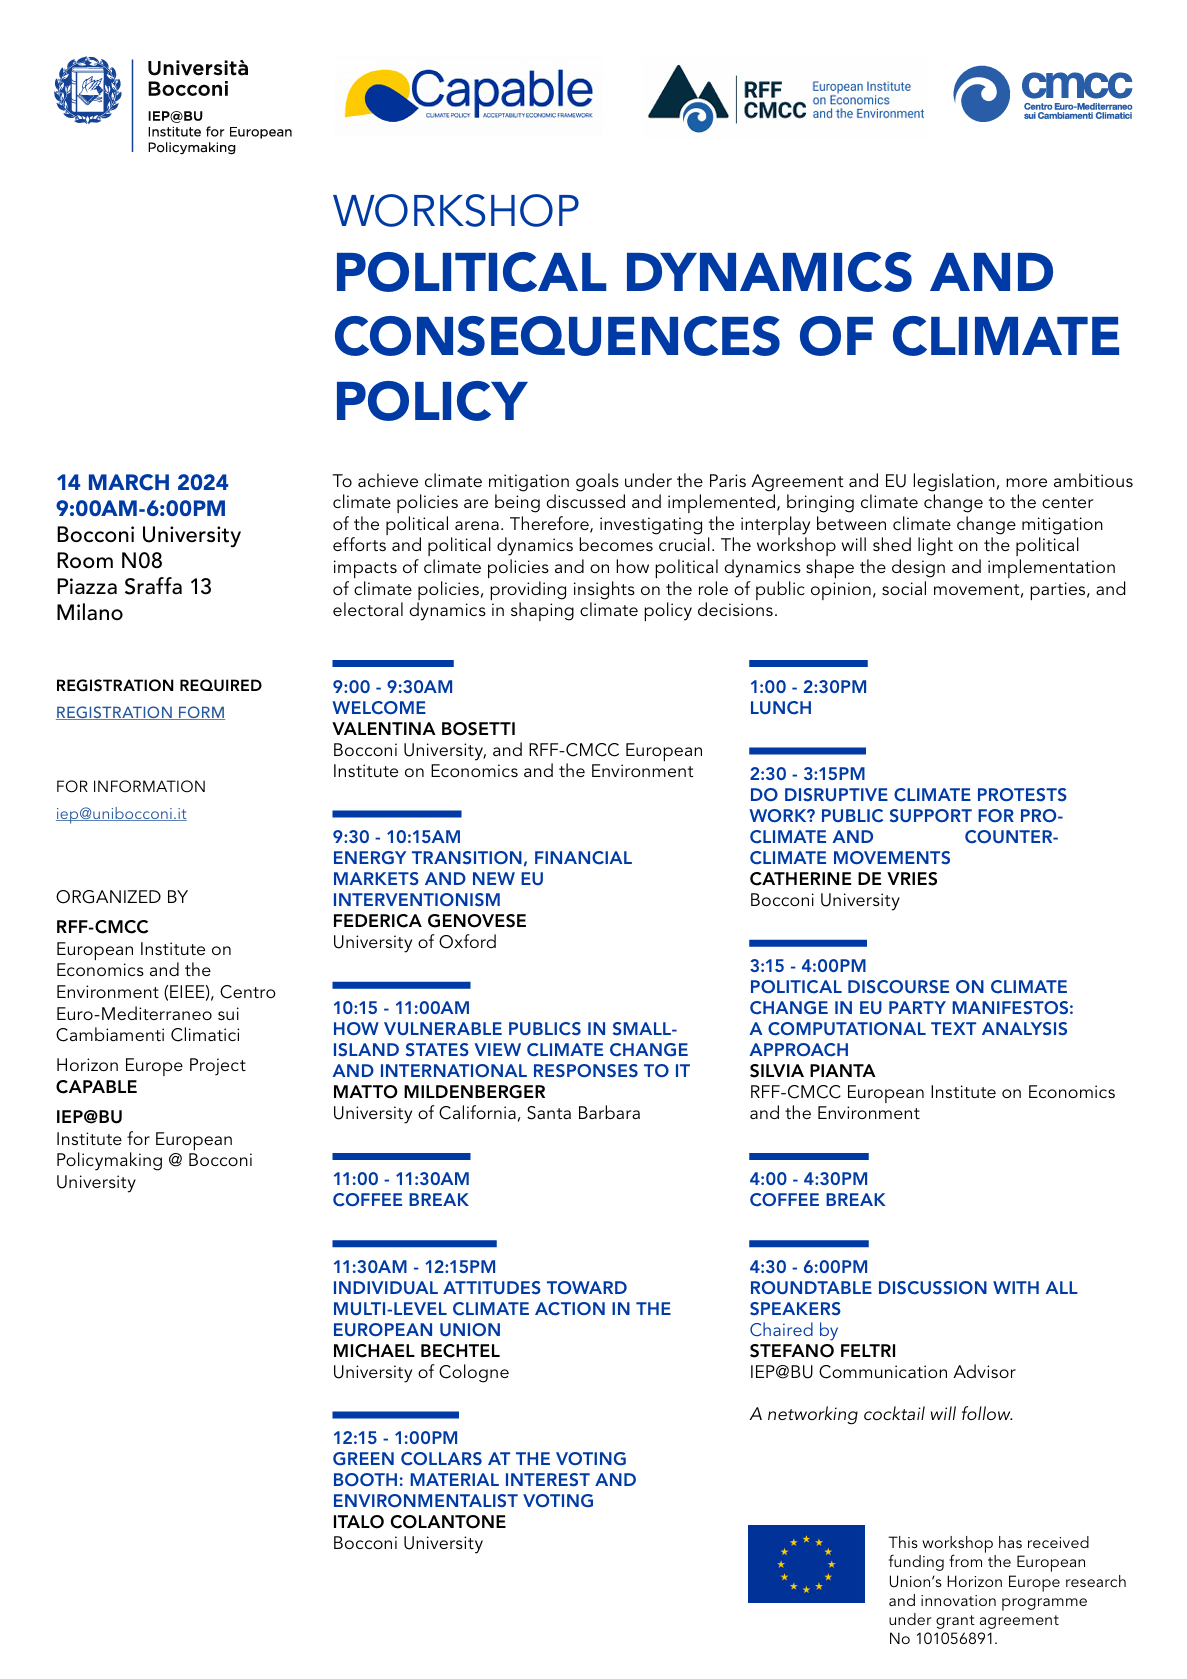 Political Dynamics and Consequences of Climate Policy